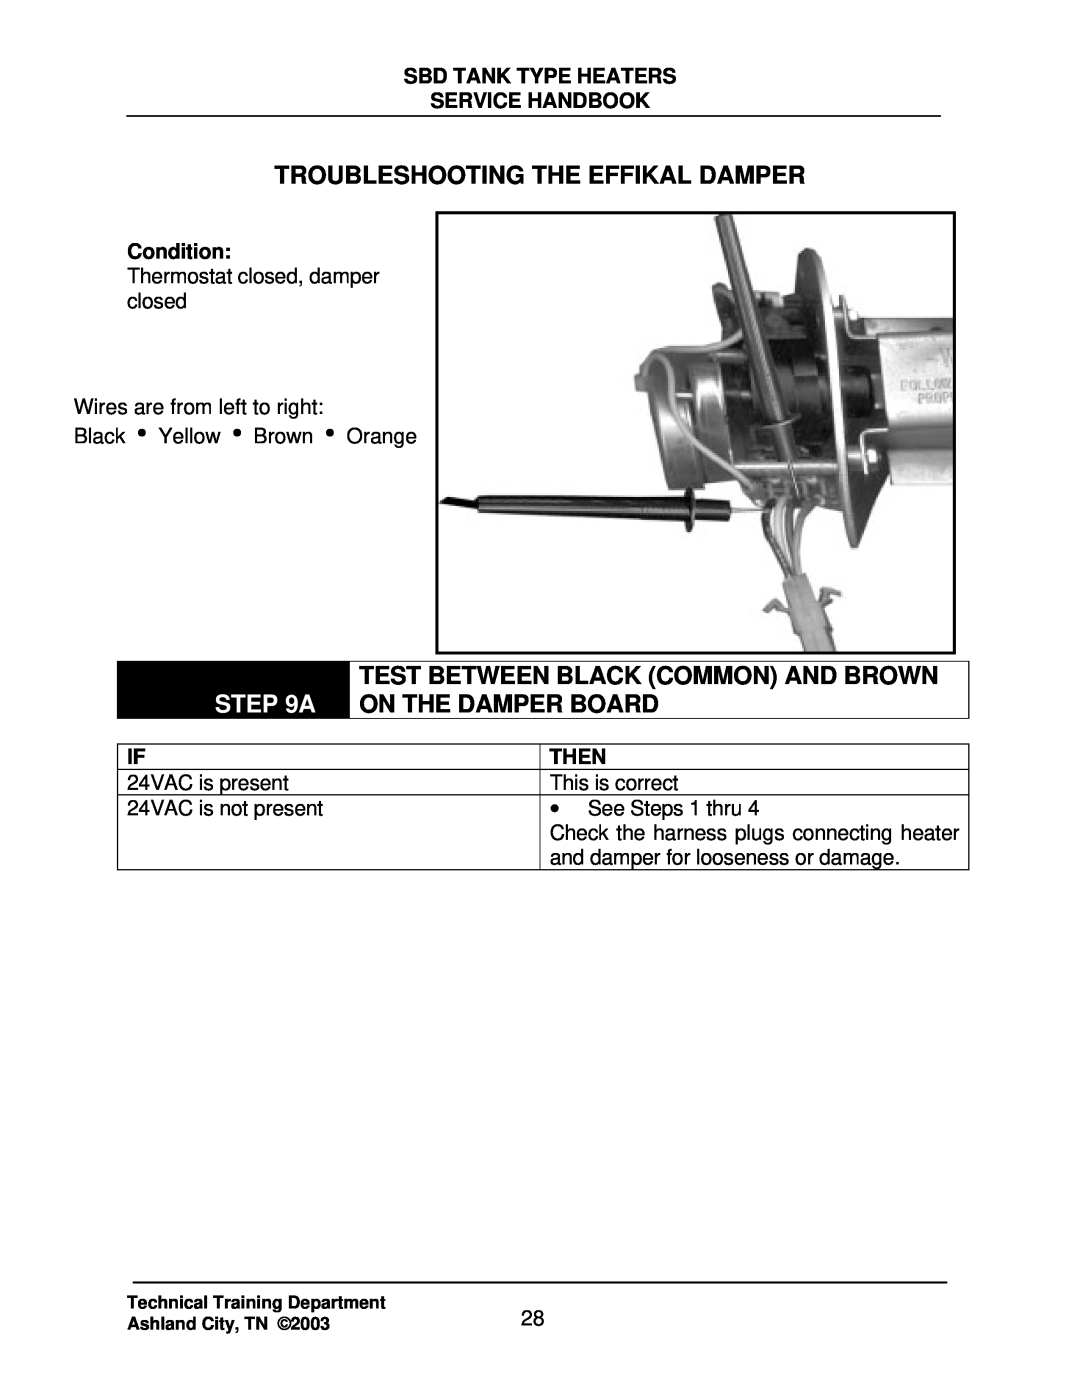 State Industries SBD71 120 Troubleshooting The Effikal Damper, A, Sbd Tank Type Heaters Service Handbook, Condition, Then 